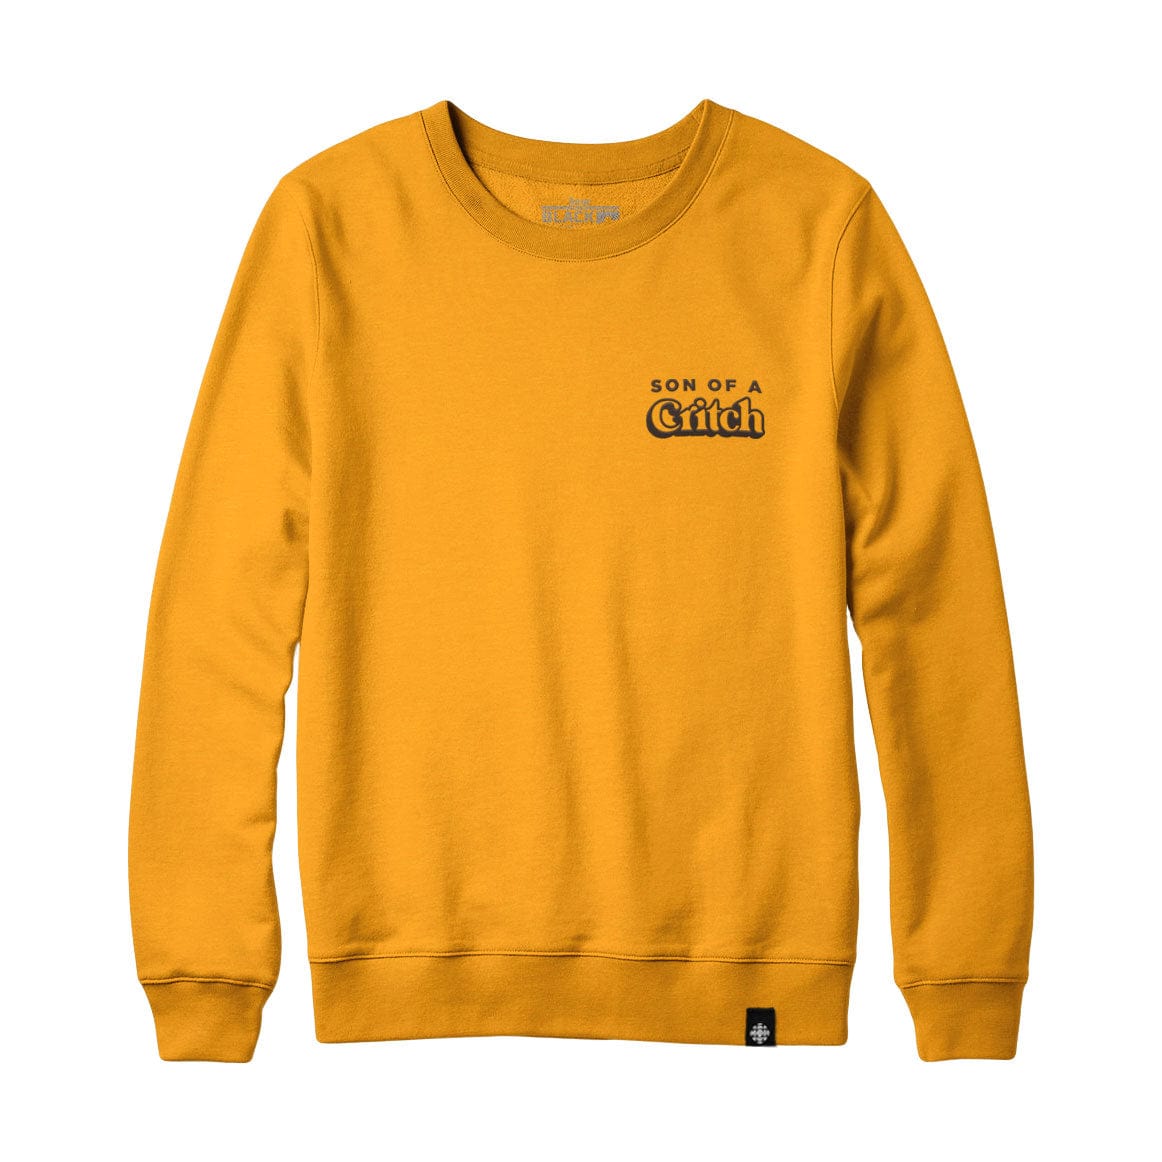 CBC's Son of a Critch Logo Embroidered Sweatshirts and Hoodies